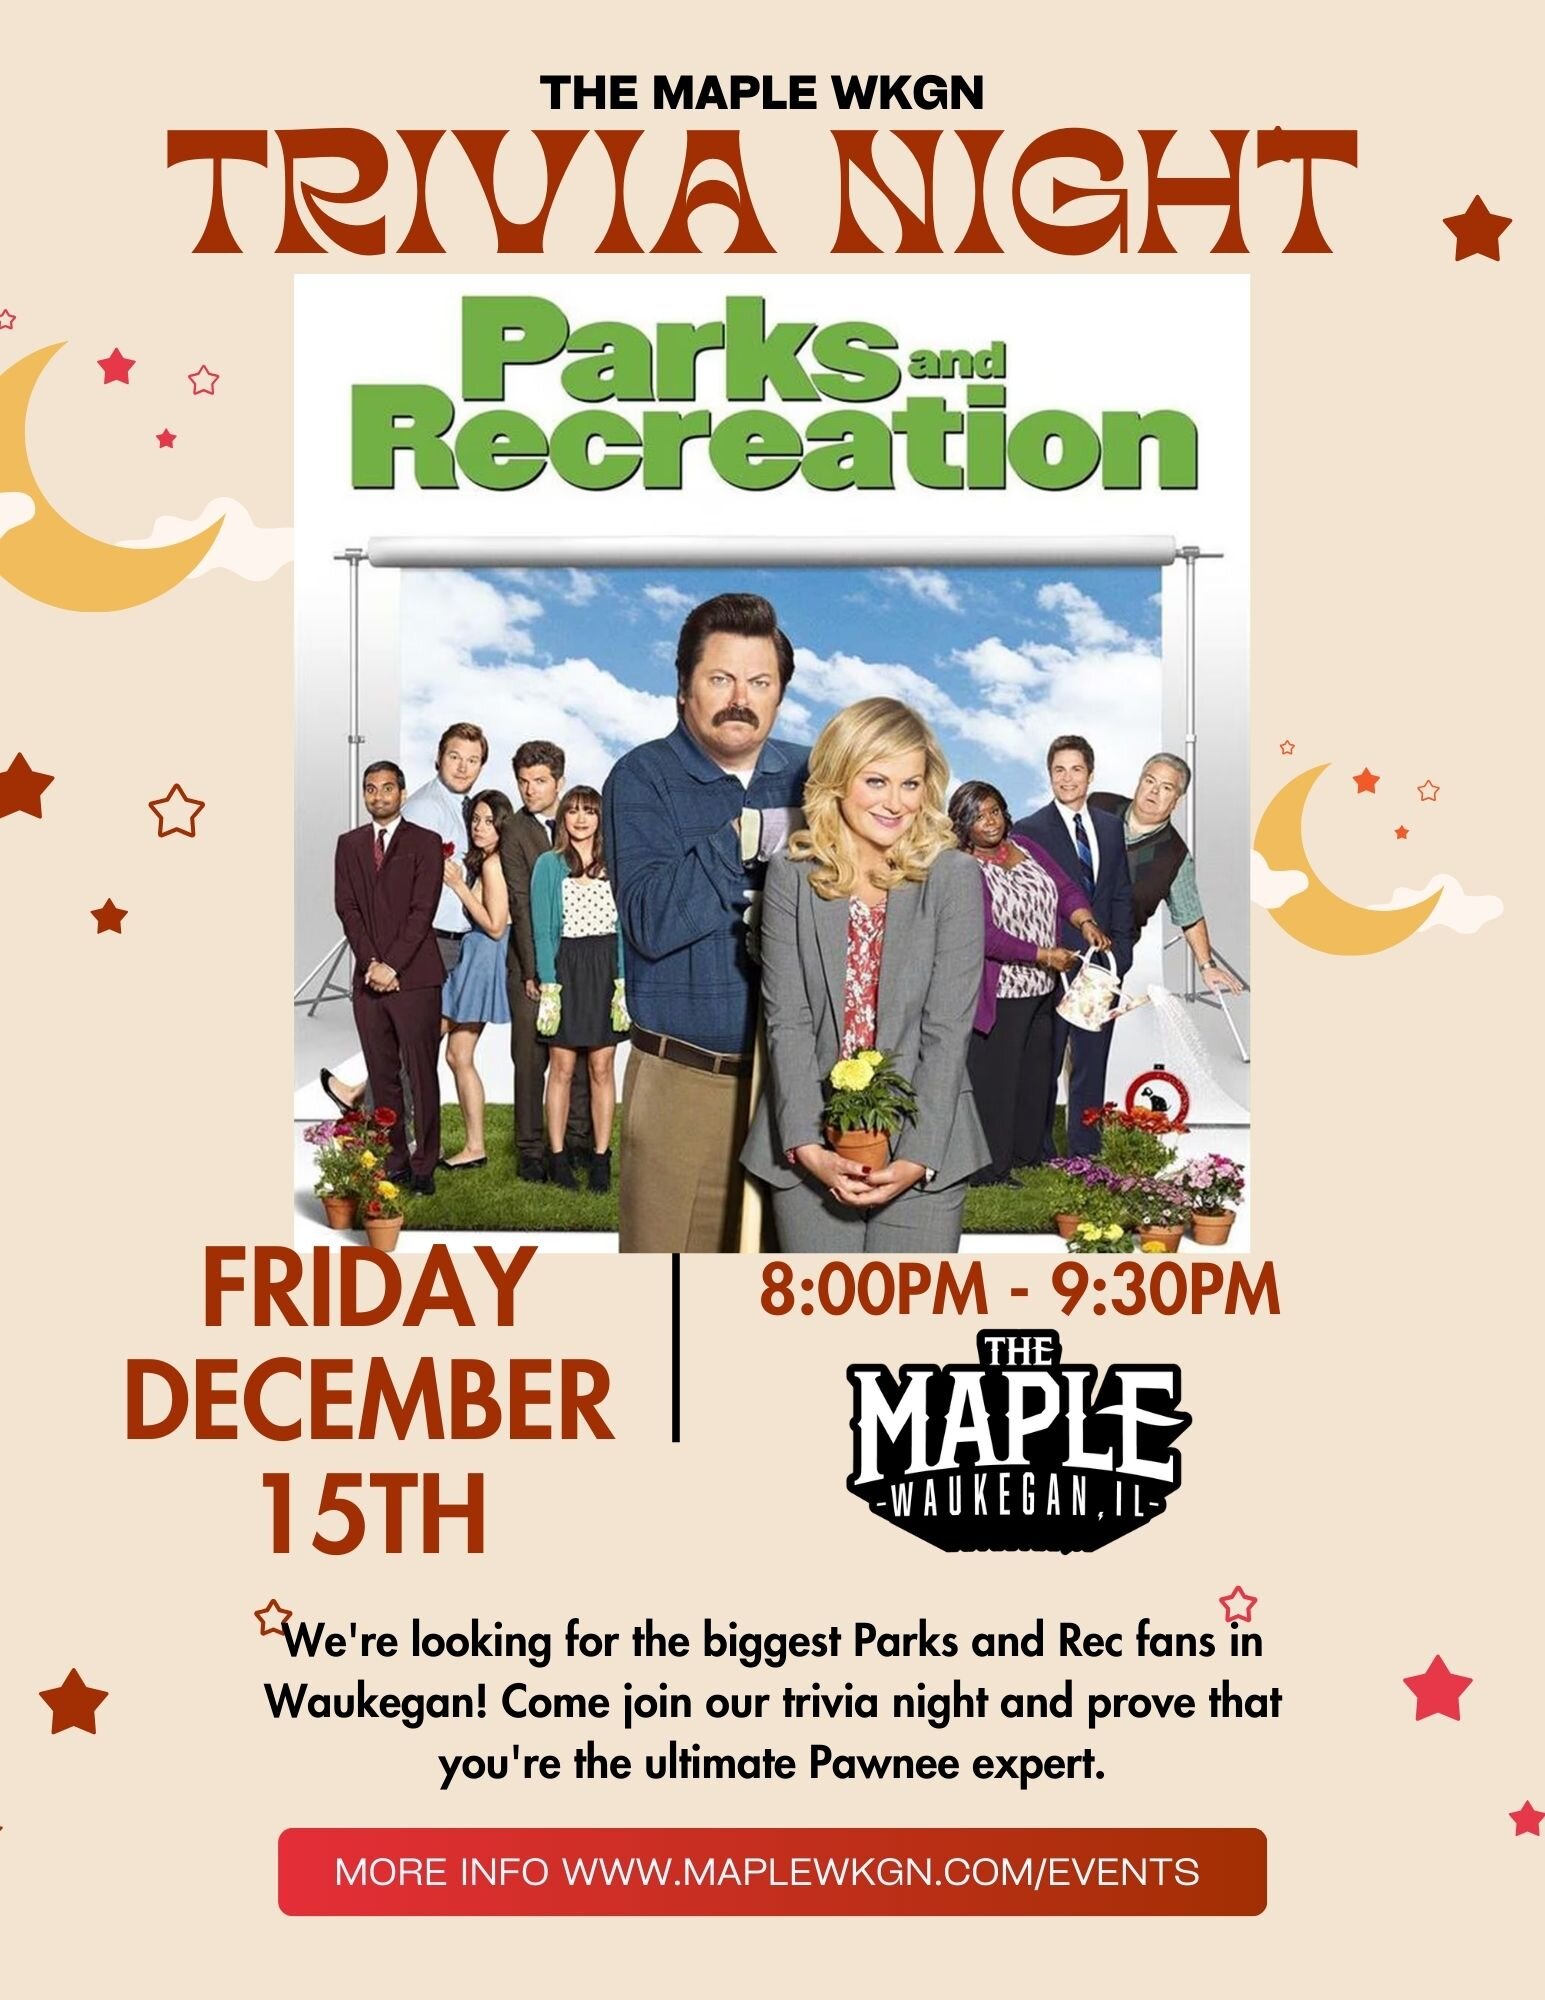 Treat yo' self to a night of fun and laughter at our Parks and Recreation trivia night! Come prepared to answer questions about your favourite characters, episodes, and iconic moments. Friday December 15th at 8pm. Prizes for the winning team! #TreatY